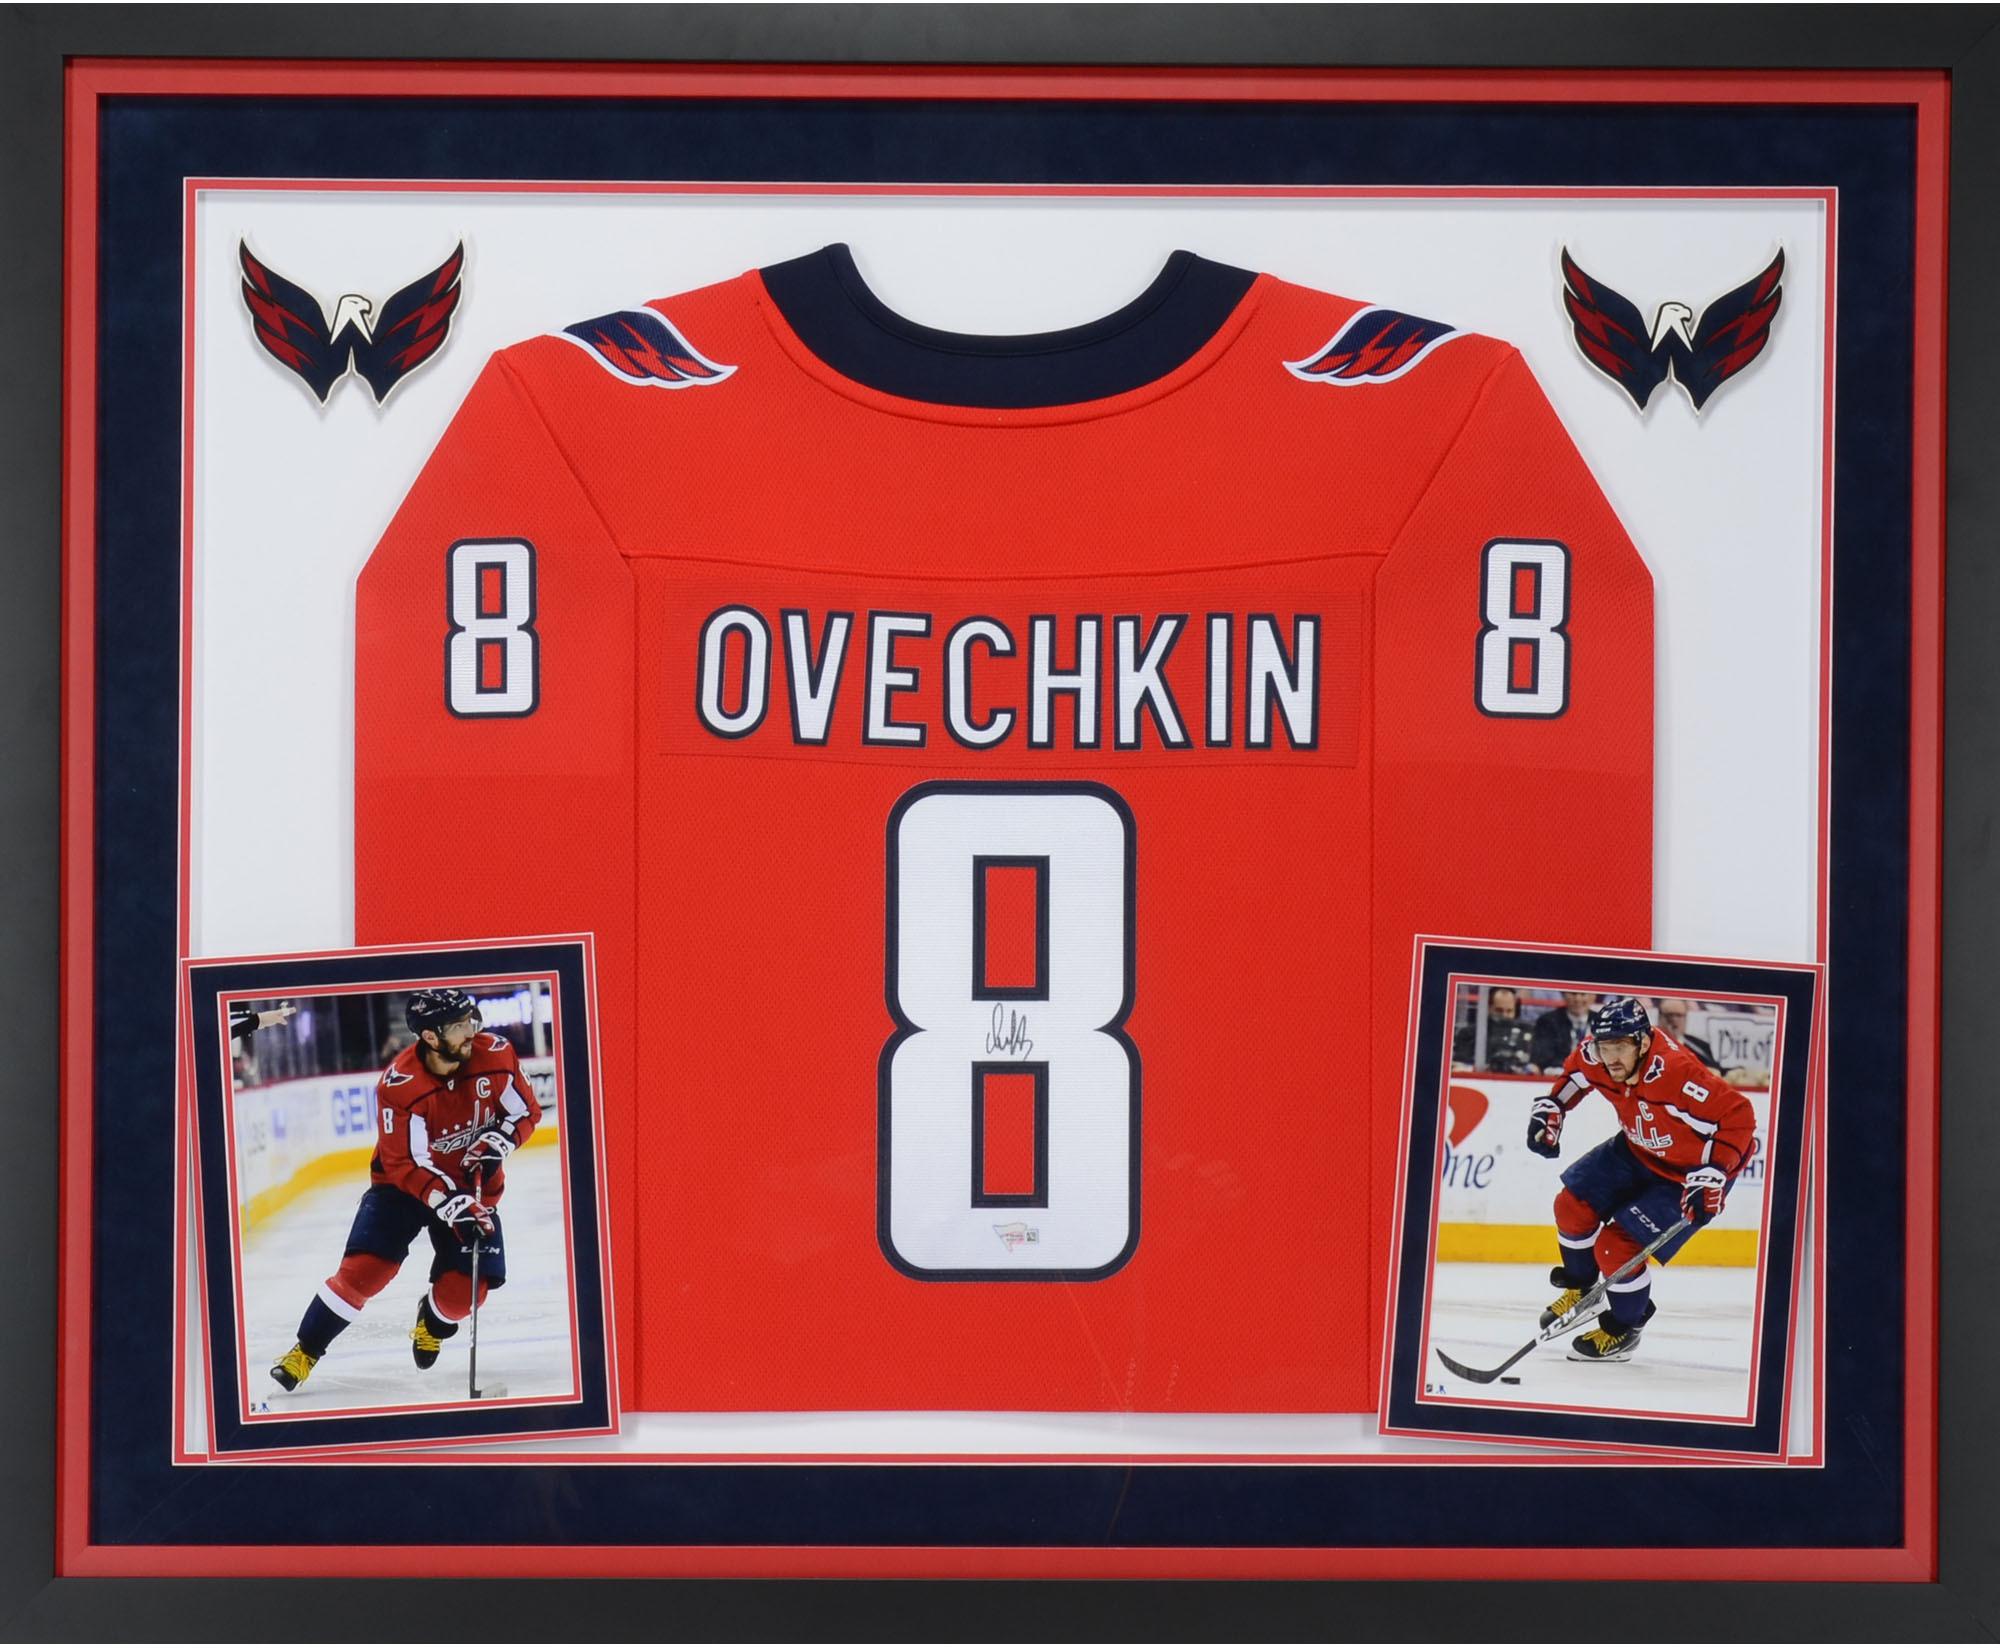 Alex Ovechkin Washington Capitals Deluxe Framed Autographed Red Fanatics Breakaway Jersey - Fanatics Authentic Certified - image 1 of 2